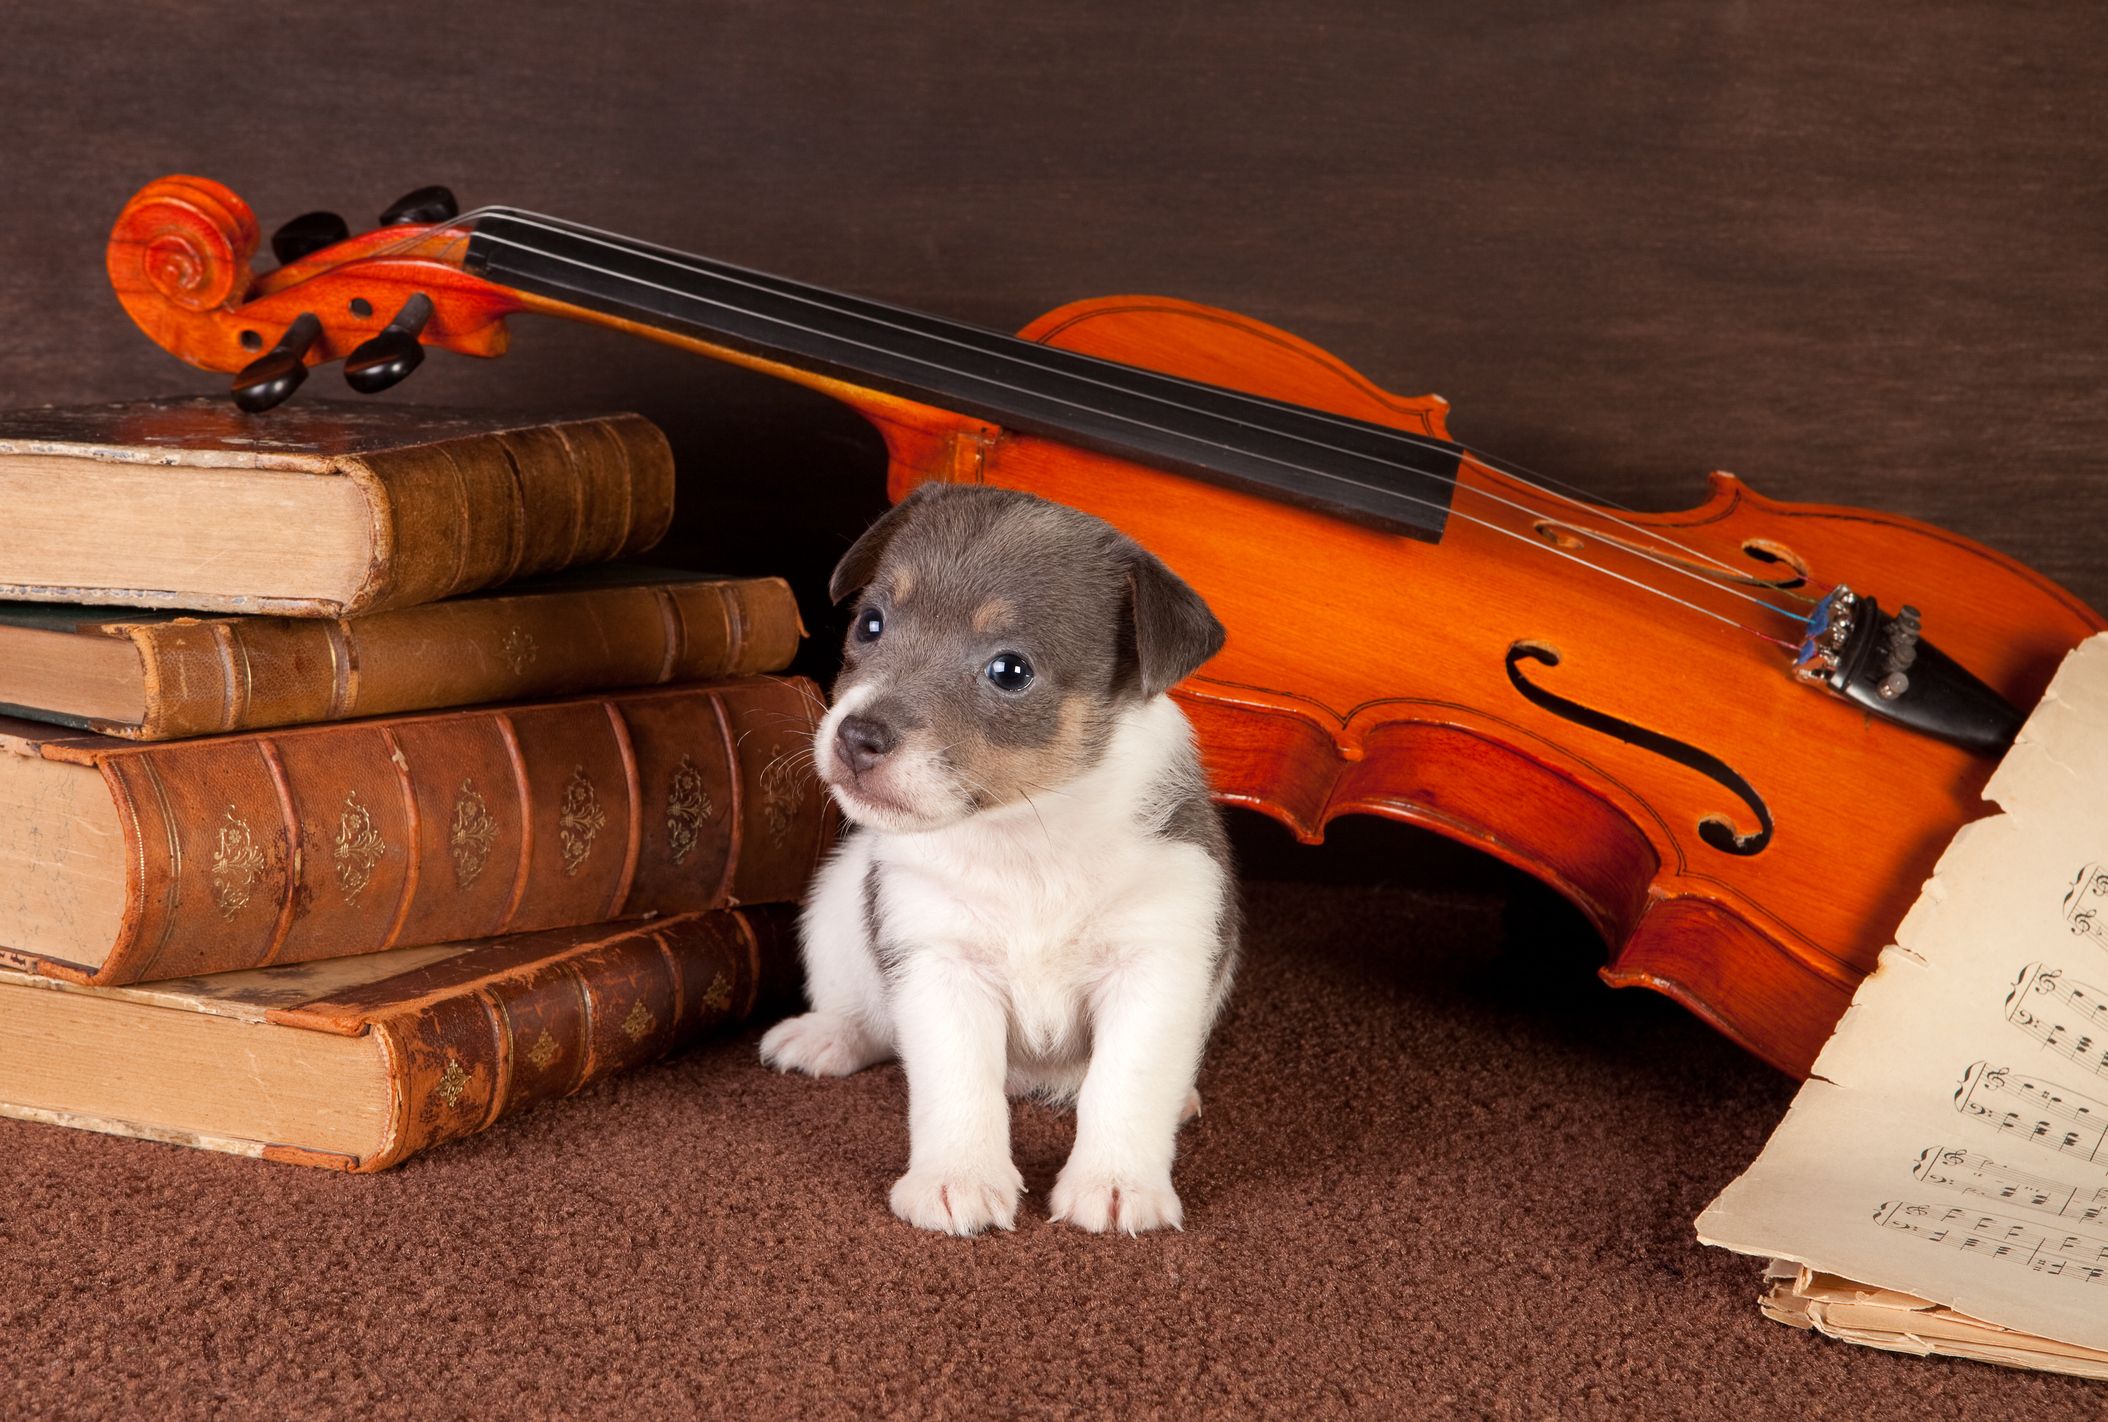 dogs and classical music